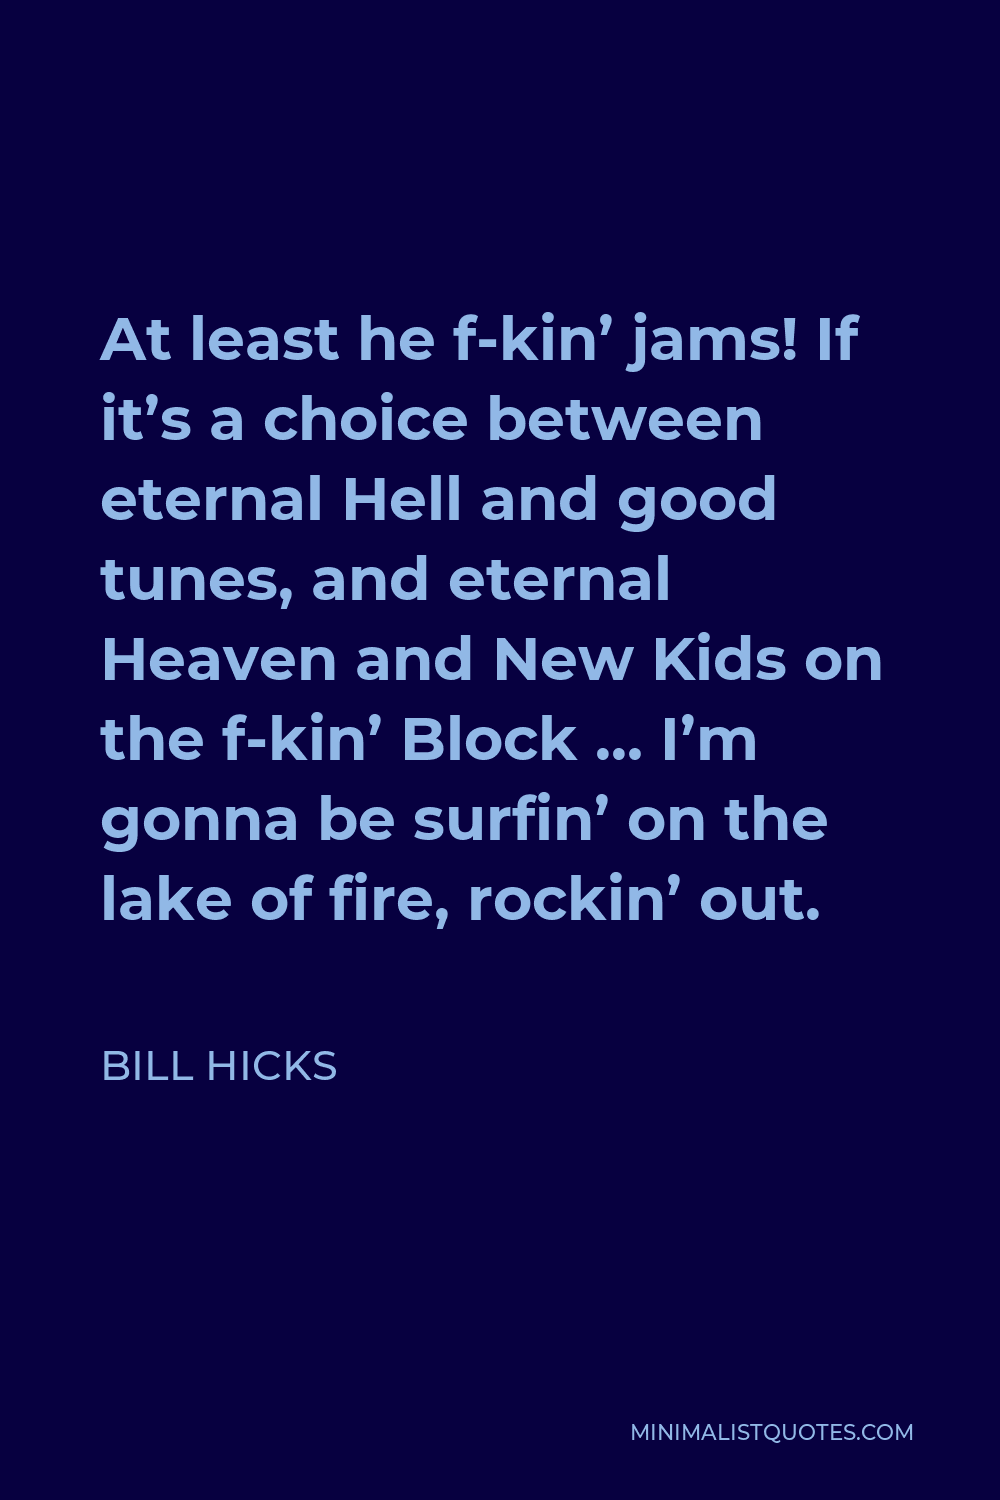 Bill Hicks Quote - At least he f-kin’ jams! If it’s a choice between eternal Hell and good tunes, and eternal Heaven and New Kids on the f-kin’ Block … I’m gonna be surfin’ on the lake of fire, rockin’ out.